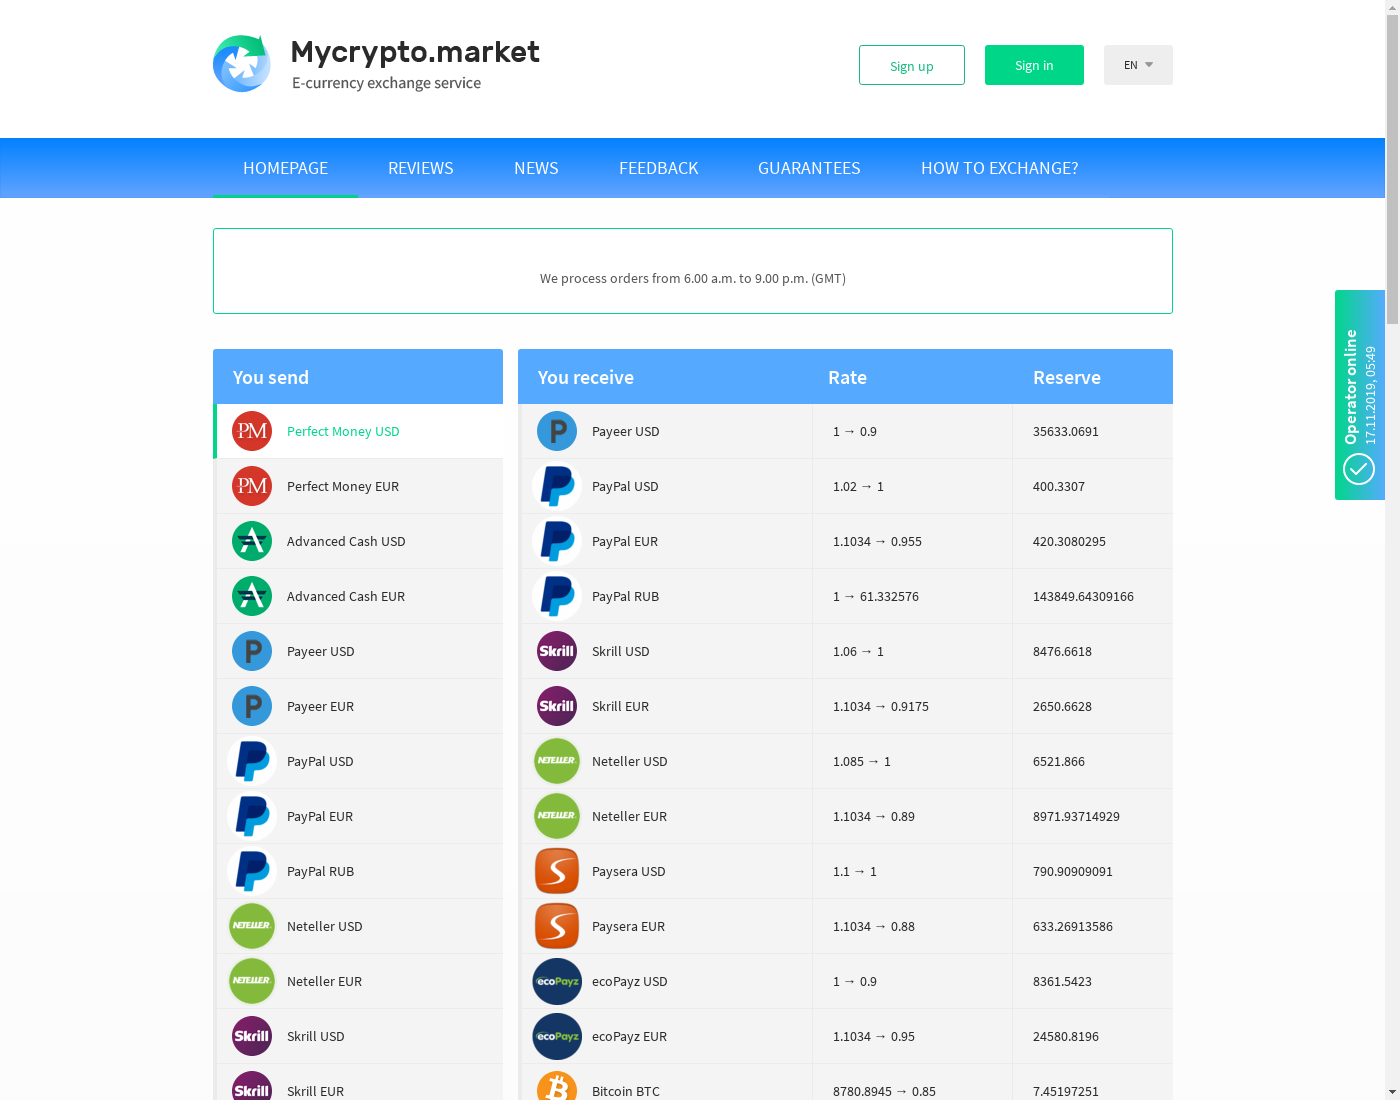 Mycrypto.market user interface: the home page in English